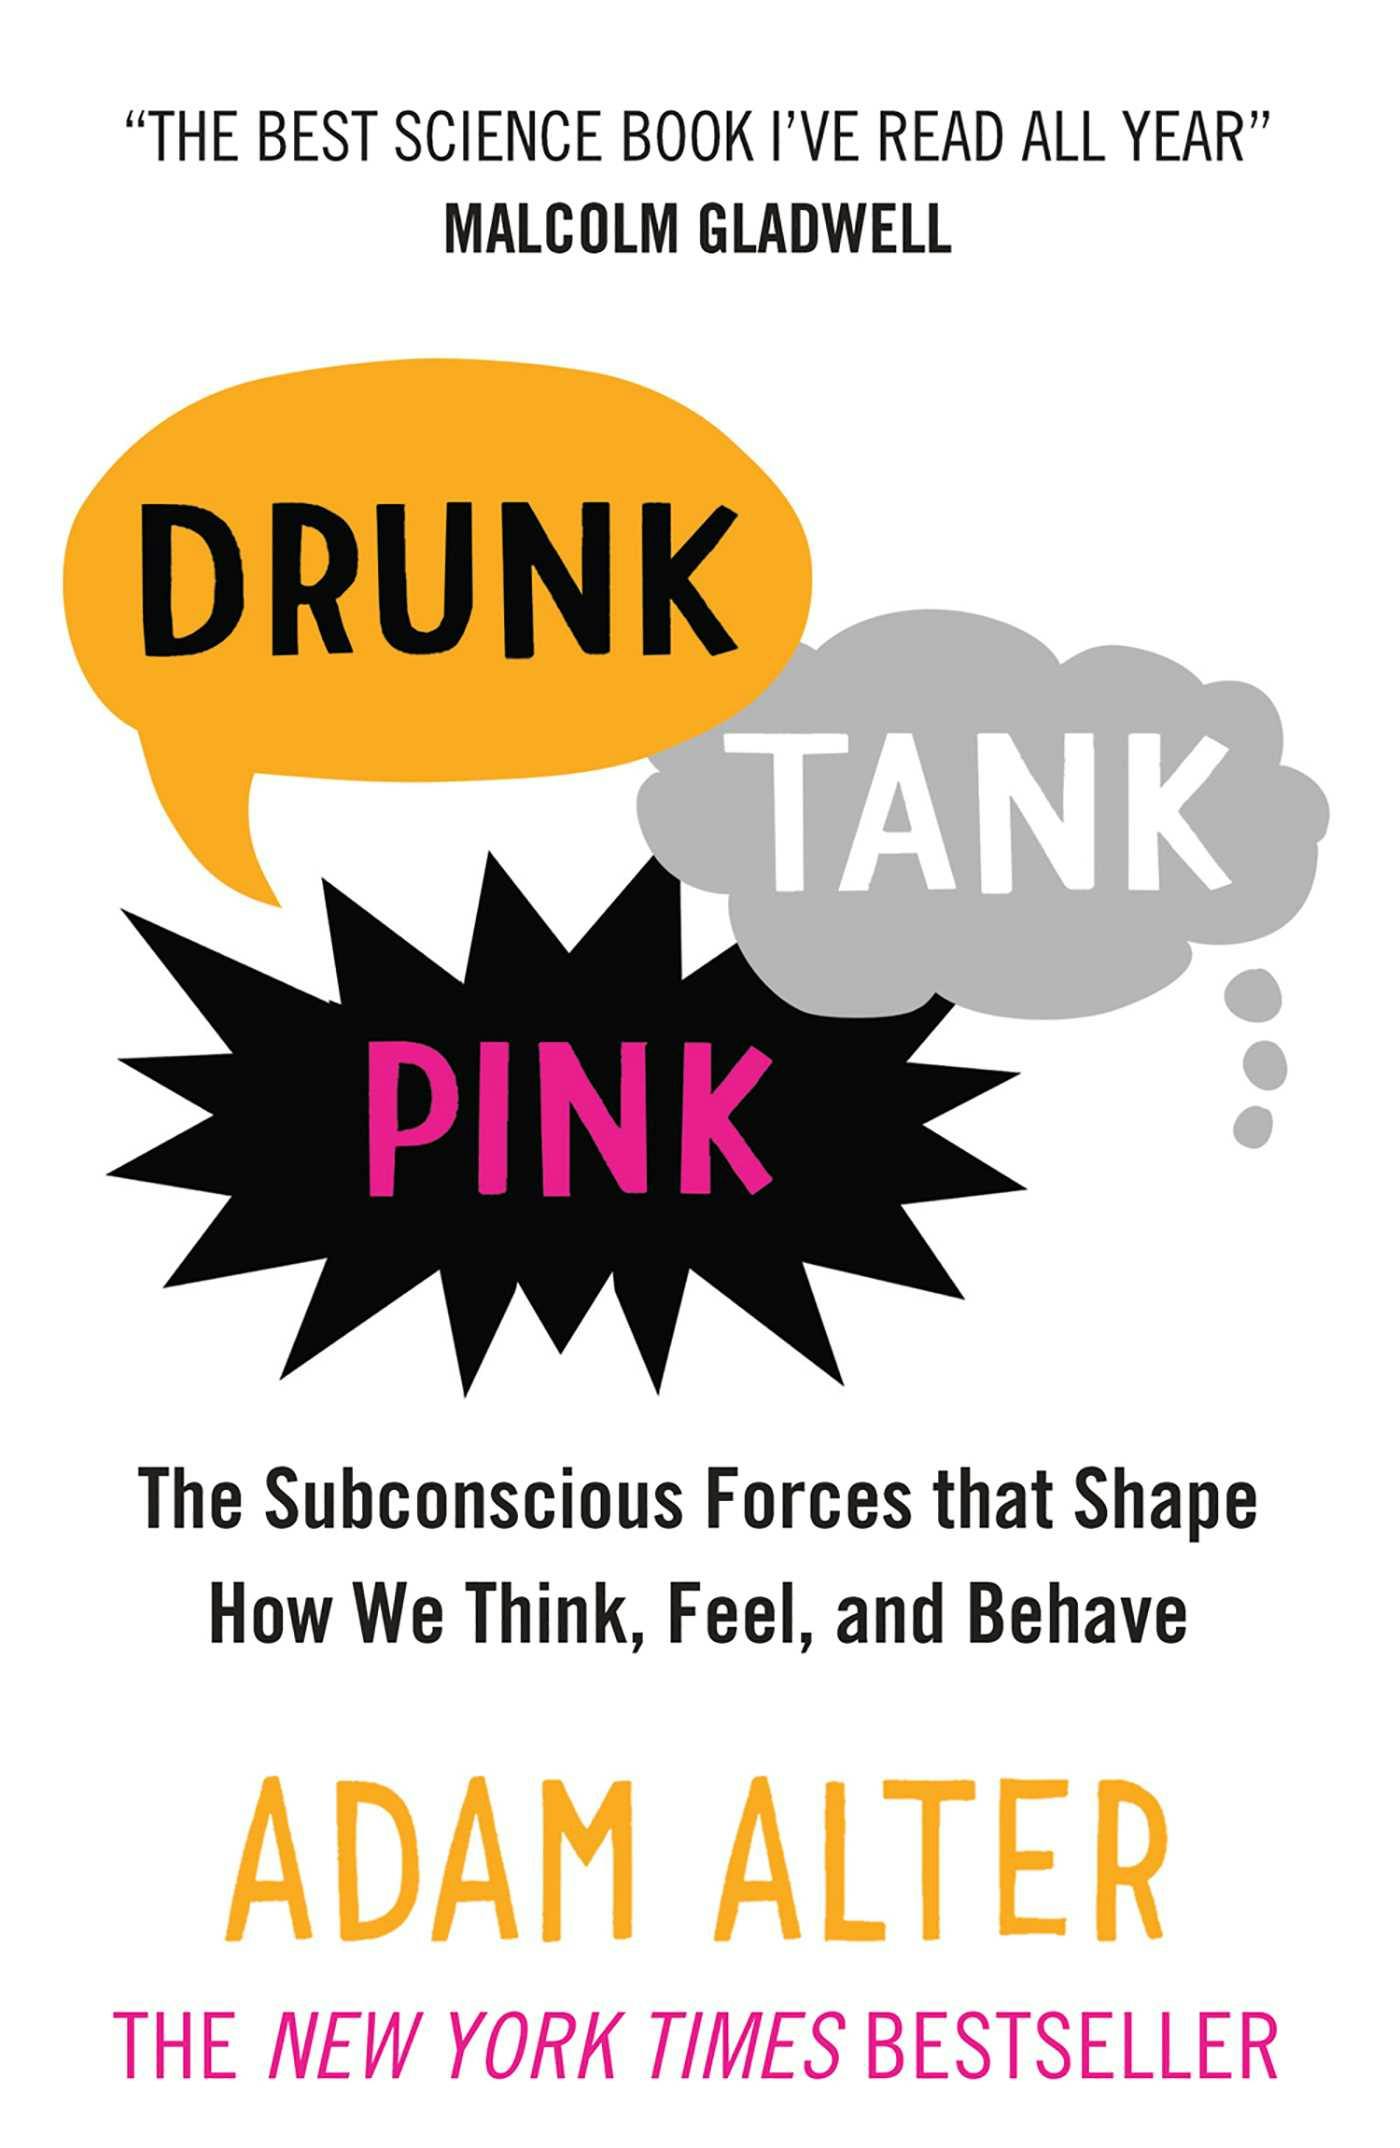 Drunk Tank Pink: The Subconscious Forces that Shape How We Think, Feel, and Behave - Adam Alter